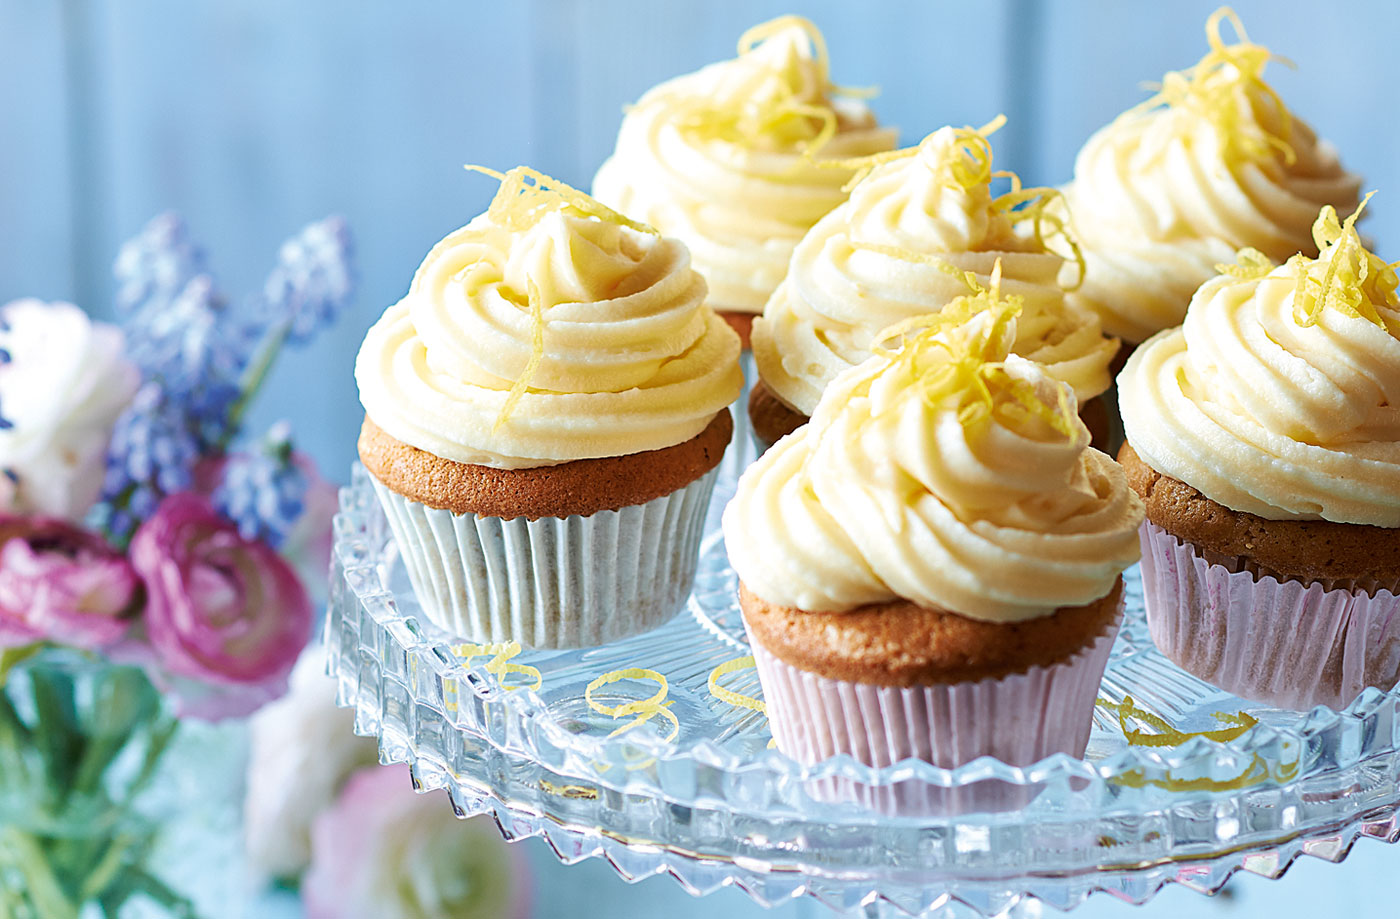 Earl Grey Cupcakes with Lemon Frosting